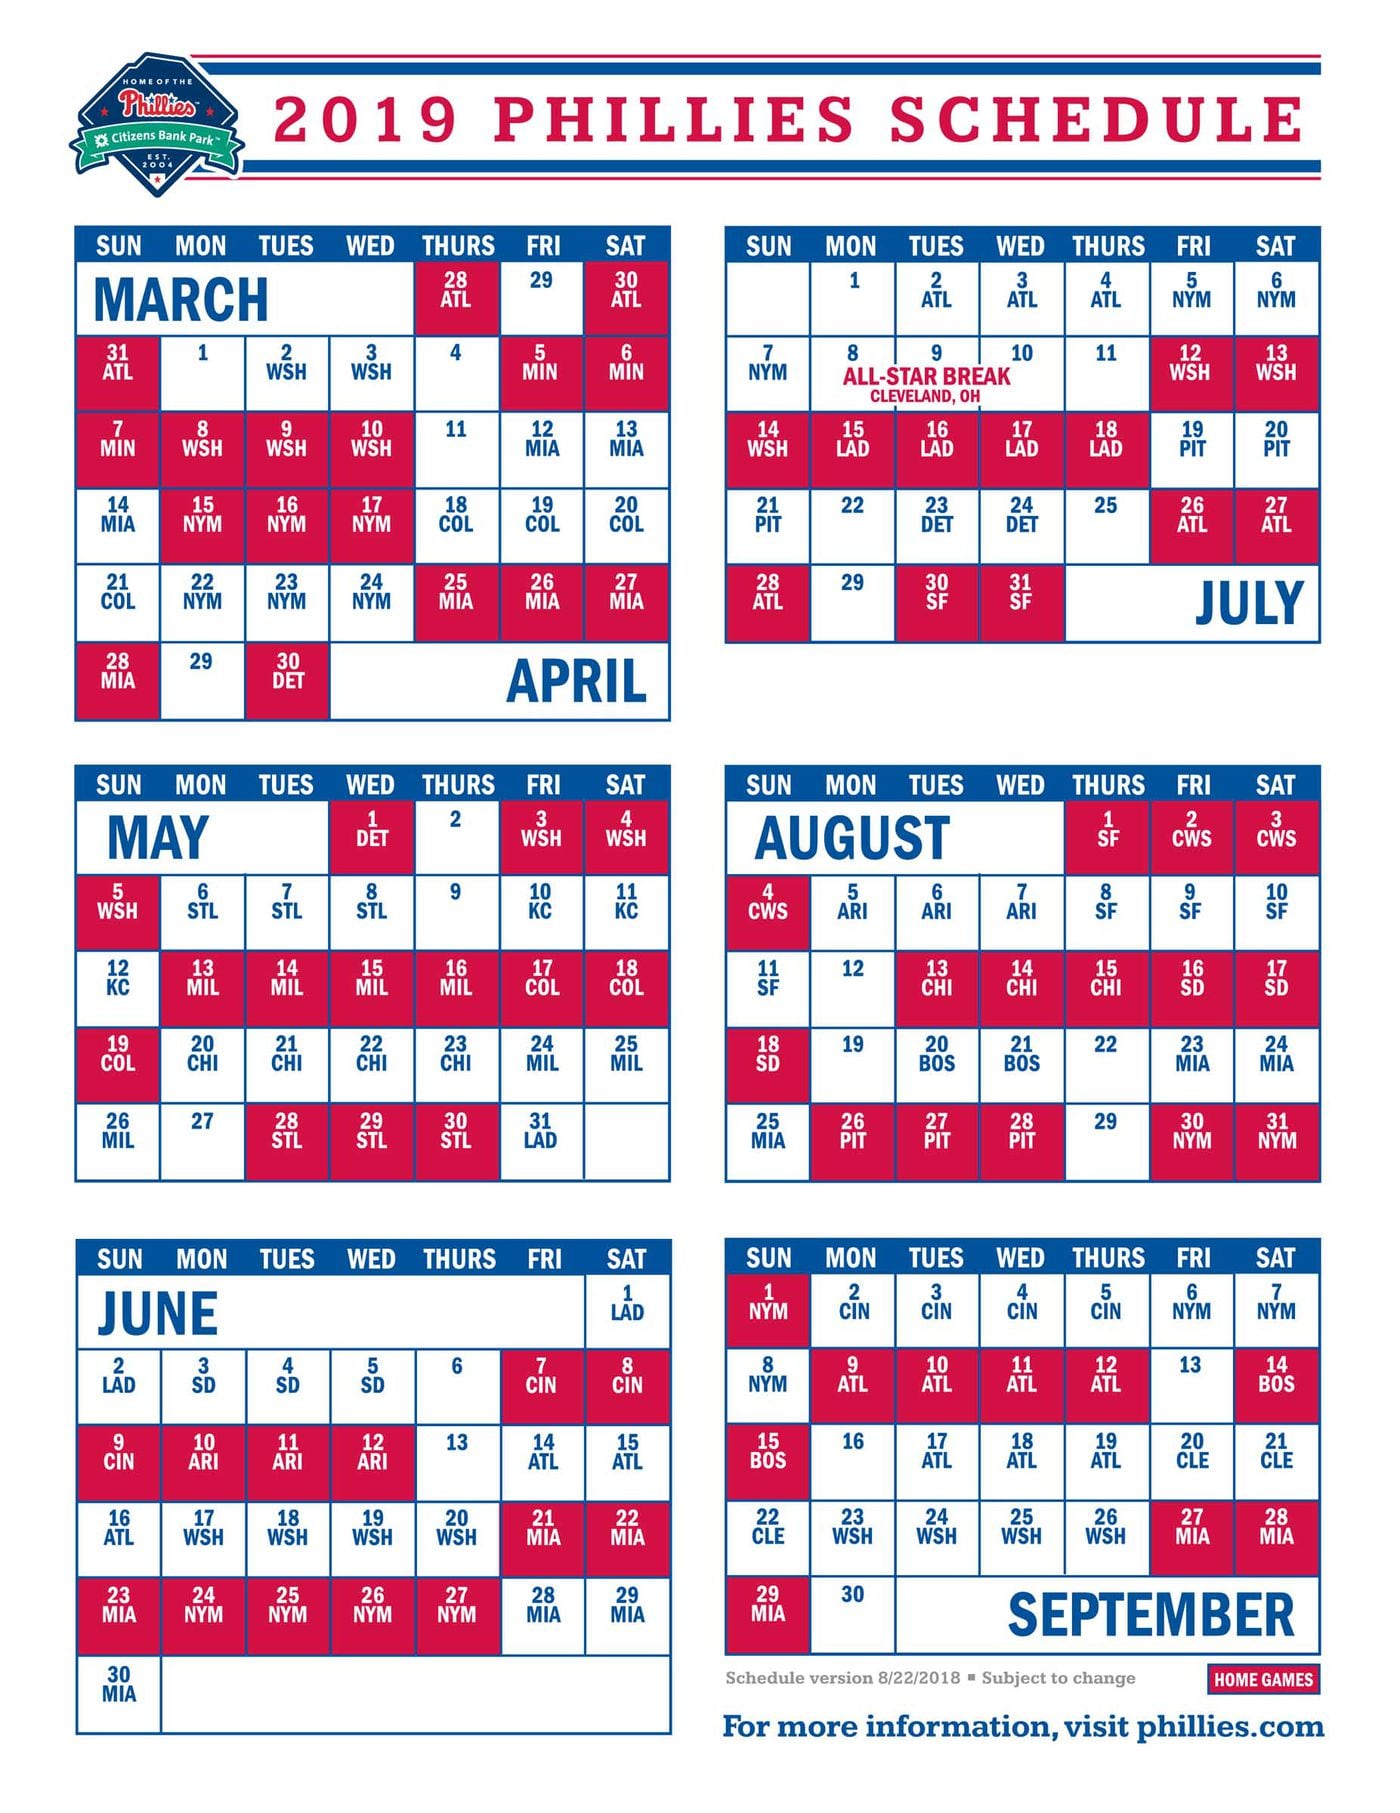 Phillies Schedule Printable - Customize and Print